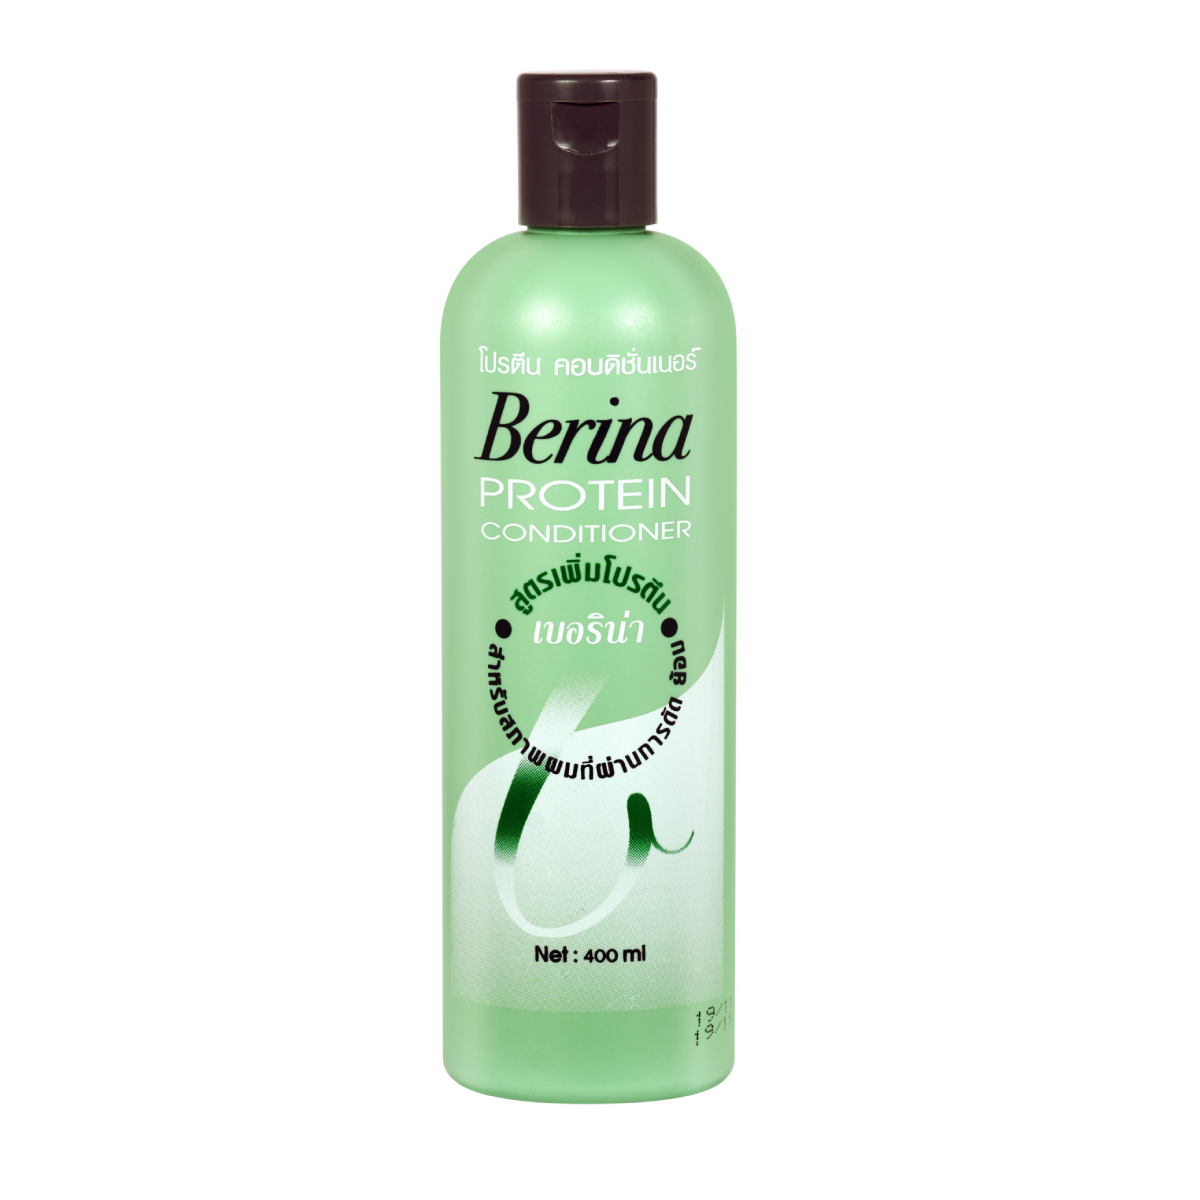 Berina Protein Conditioner - Nourishing Repair for Healthy Hair